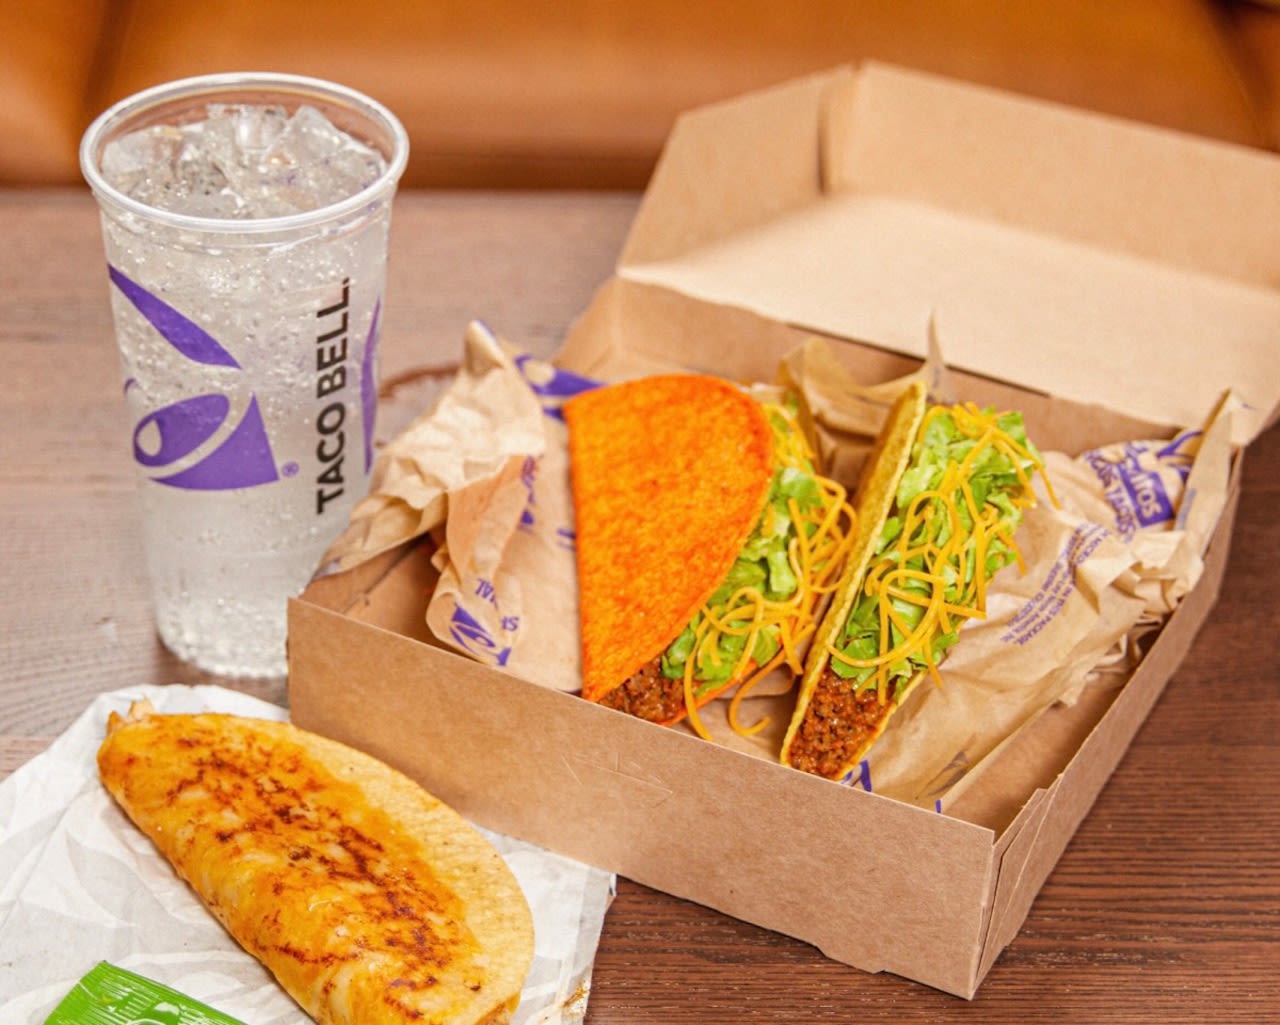 Taco Bell is opening an ‘early retirement community’